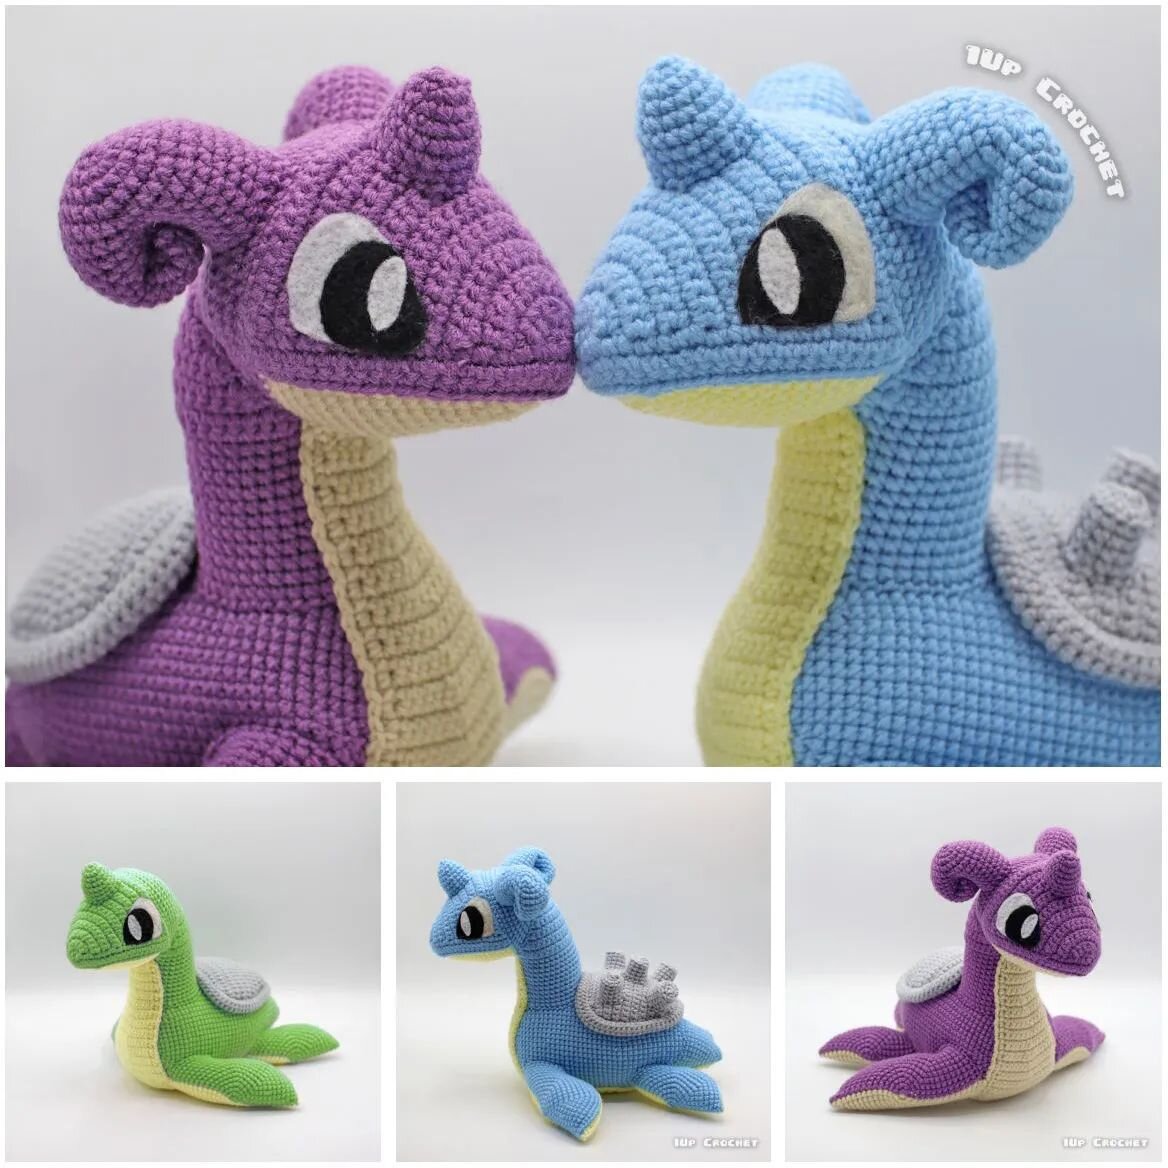 It's here! This pattern is now LIVE in all my shops! Let me introduce you to Nessie! She sits at approximately 10 inches tall and can be made in a variety of colors. Curly ears are included for customization and cuteness! 
Check my profile page for s